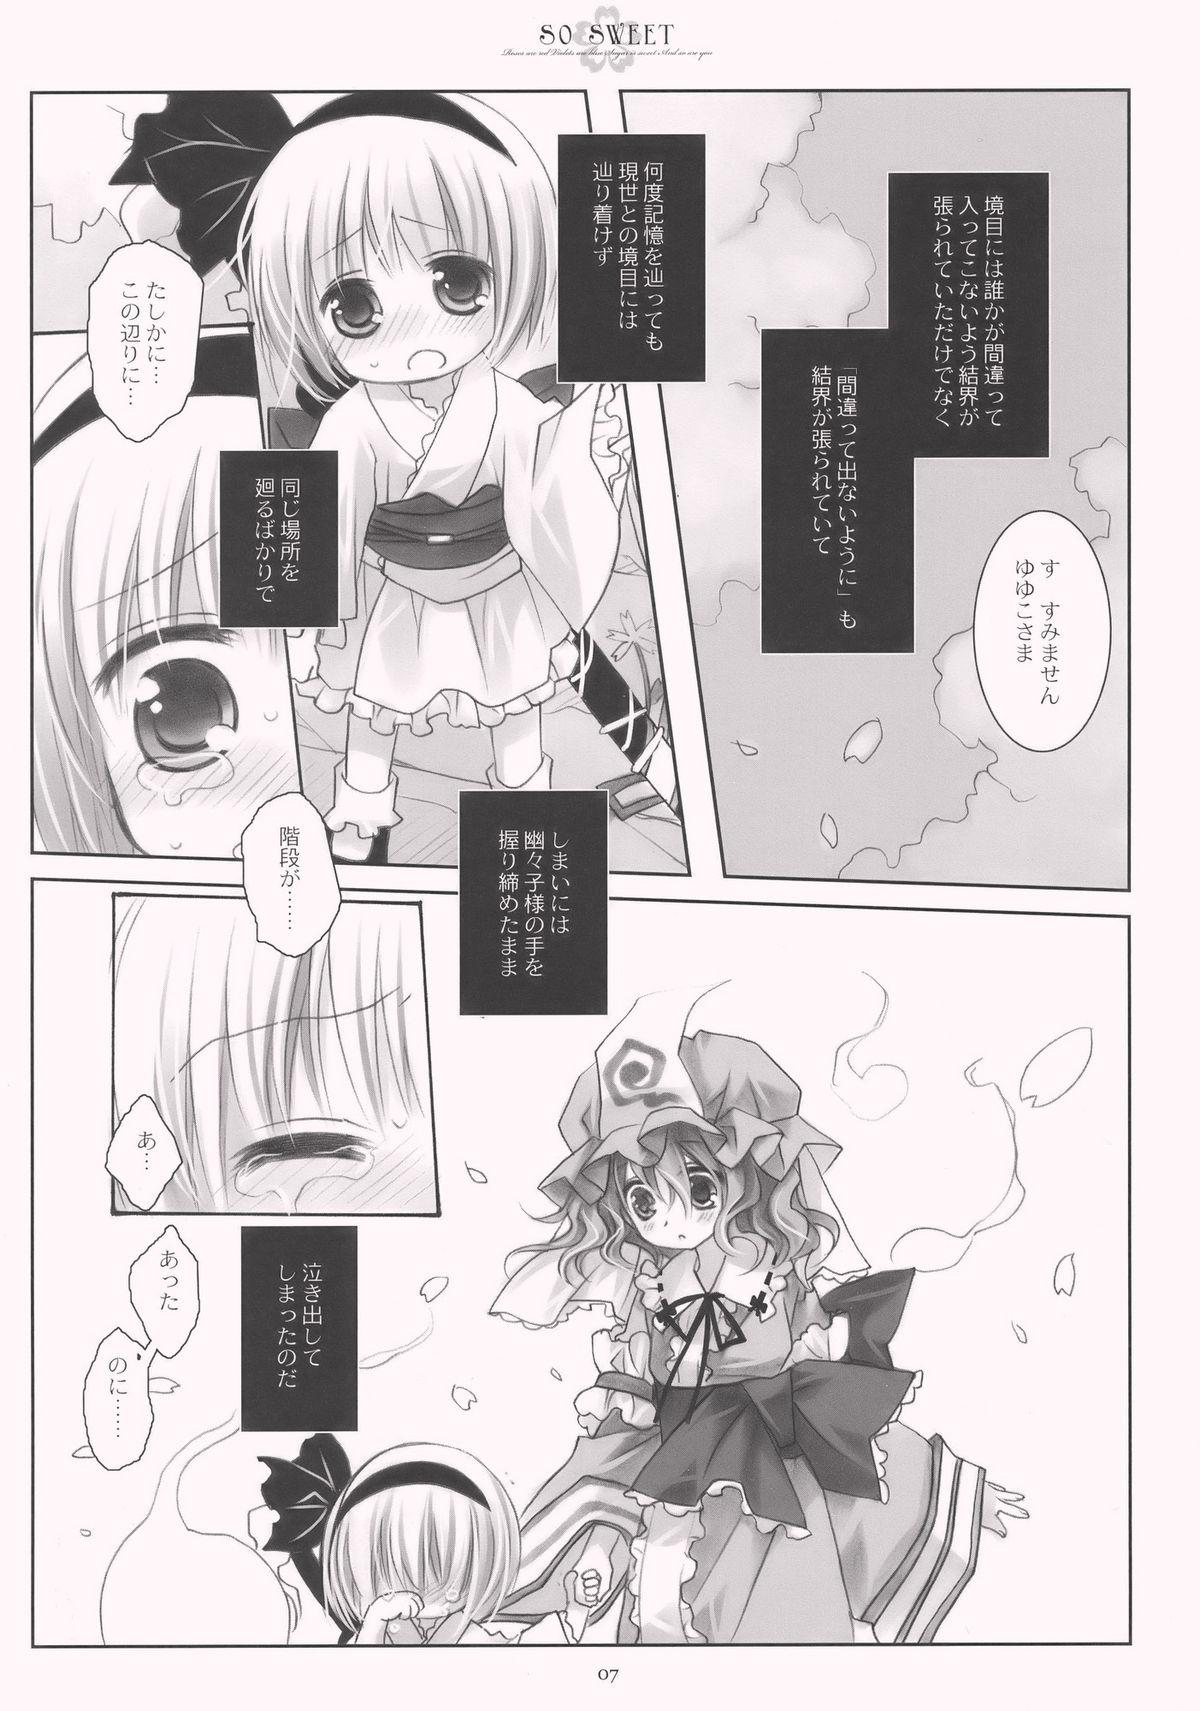 Livesex SO SWEET - Touhou project Asshole - Page 7